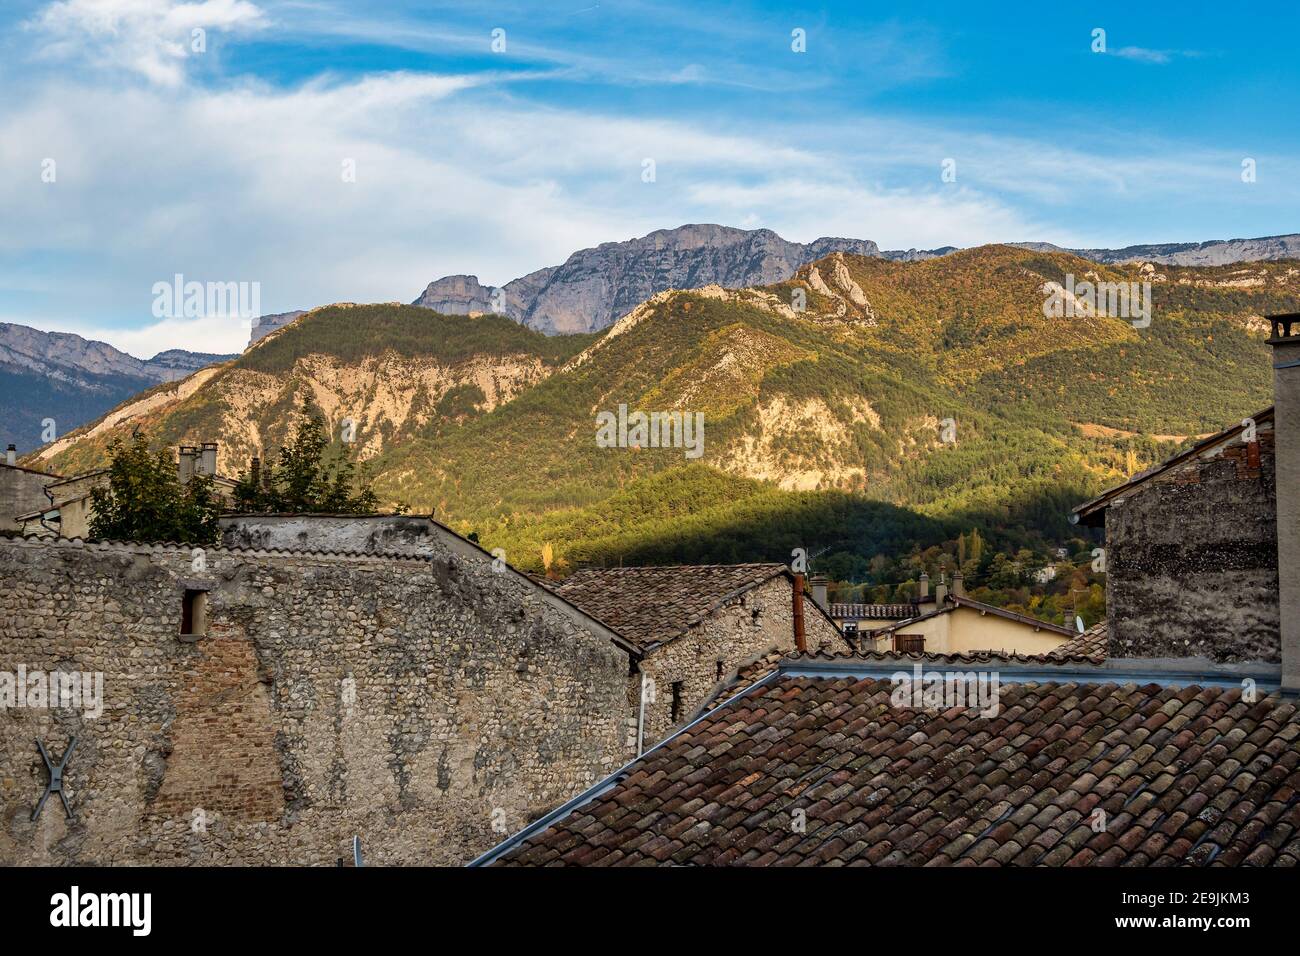 Cityscape of Die, Chatillon en Diois in Vercors Natural Regional Park, Diois, Drome, France in Europe Stock Photo